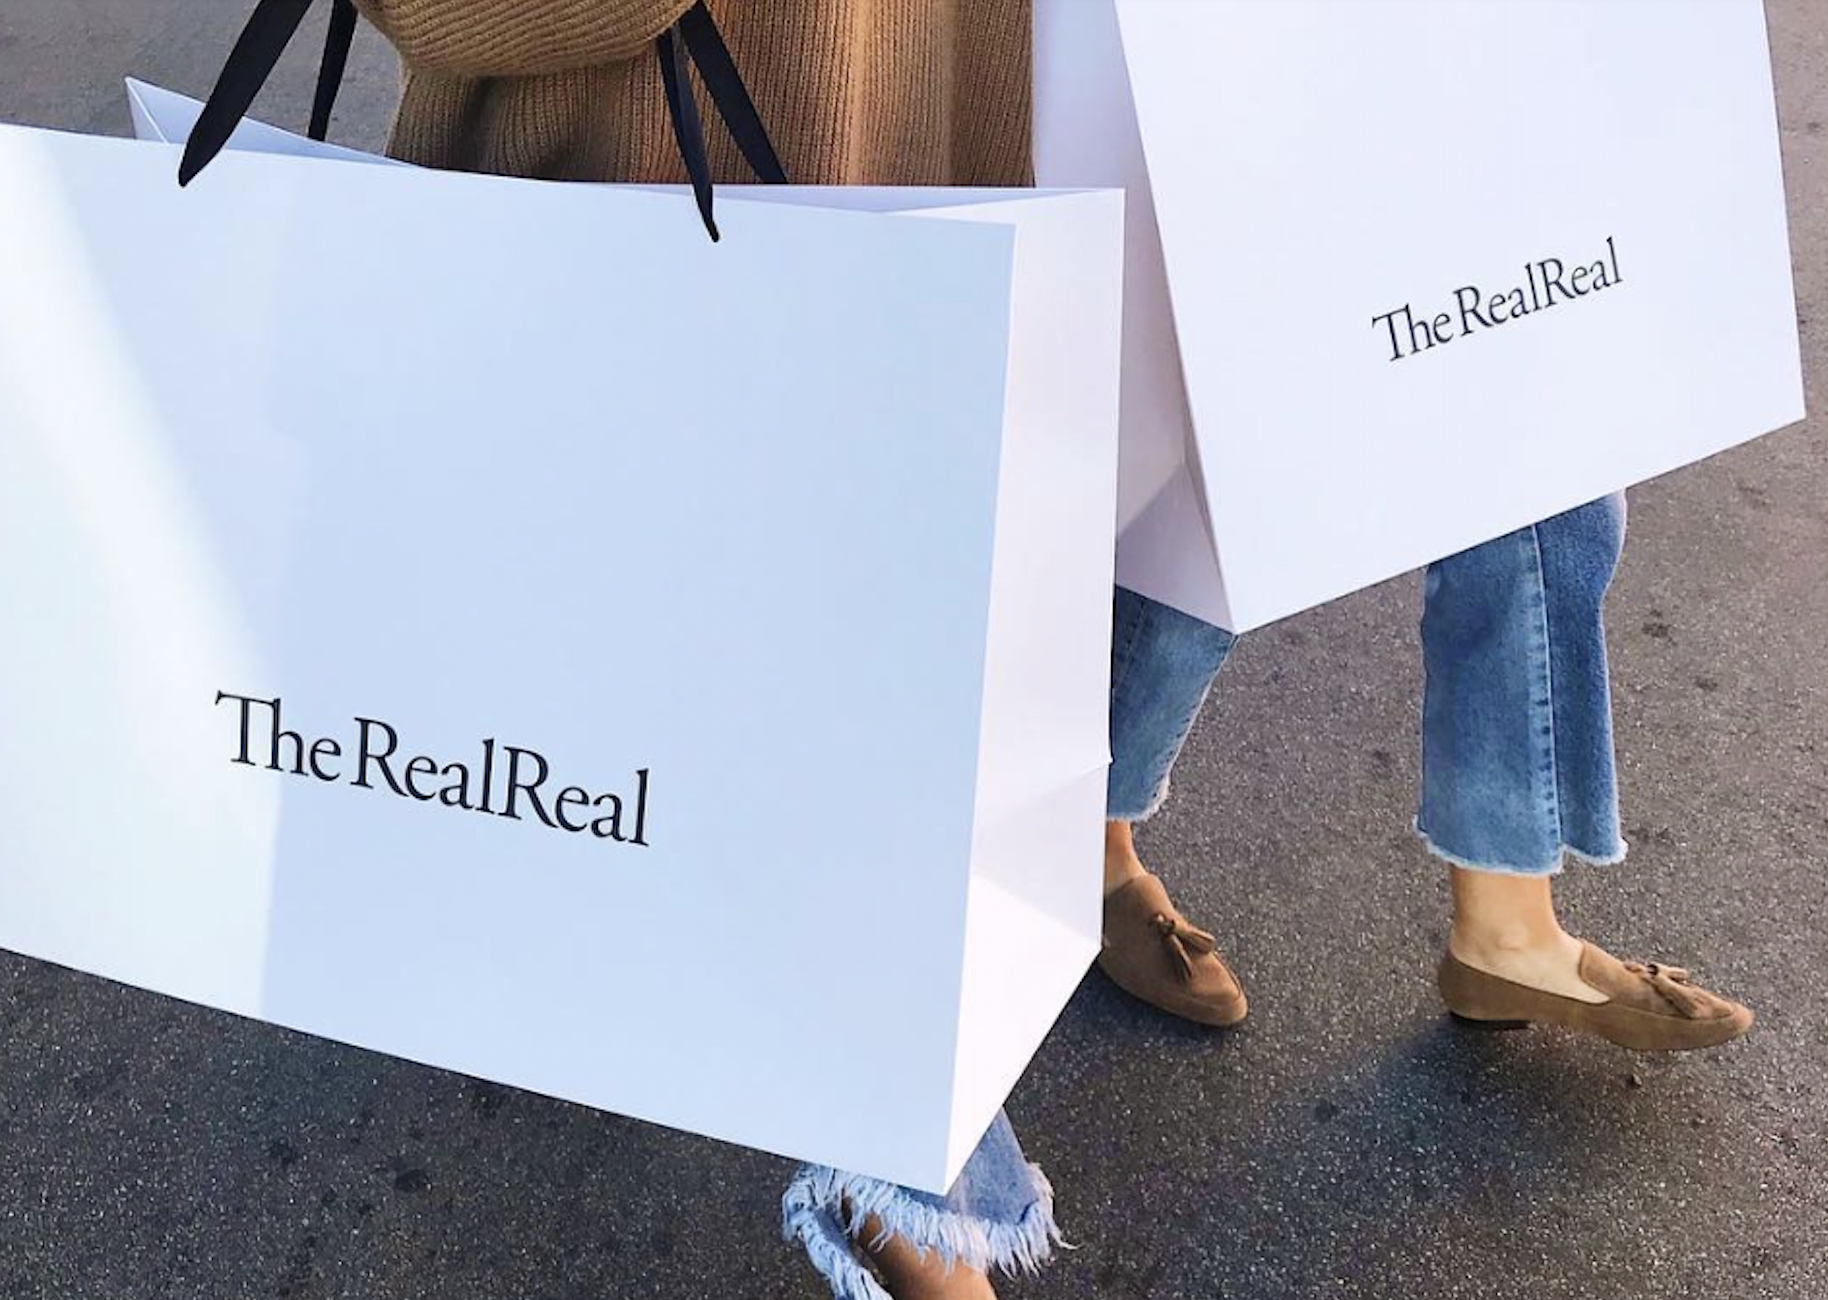 The RealReal Files Anti-Competition Counterclaims Against Chanel